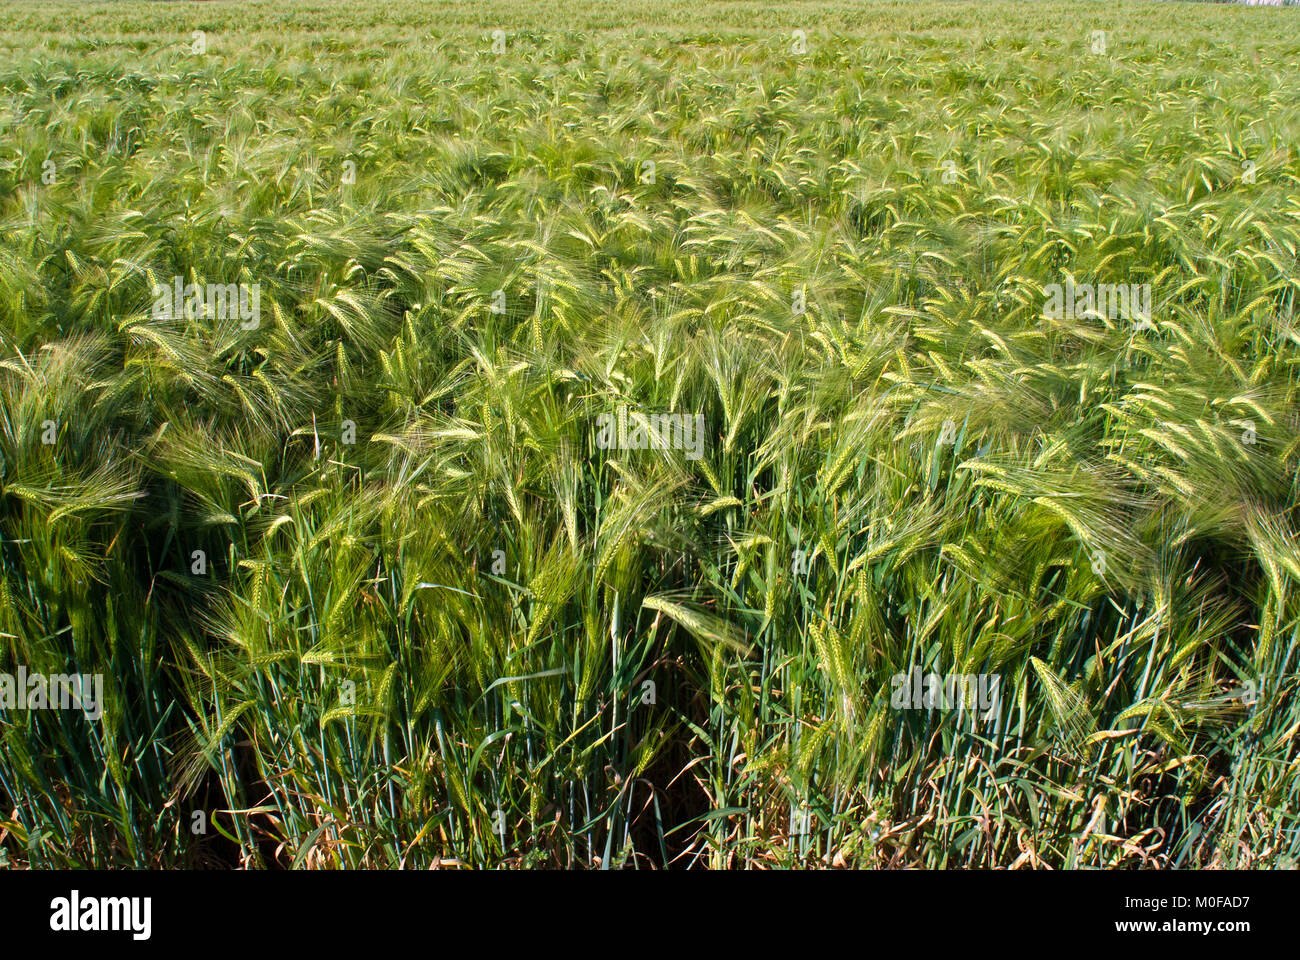 Wheat field in Umbria, Italy Stock Photo - Alamy